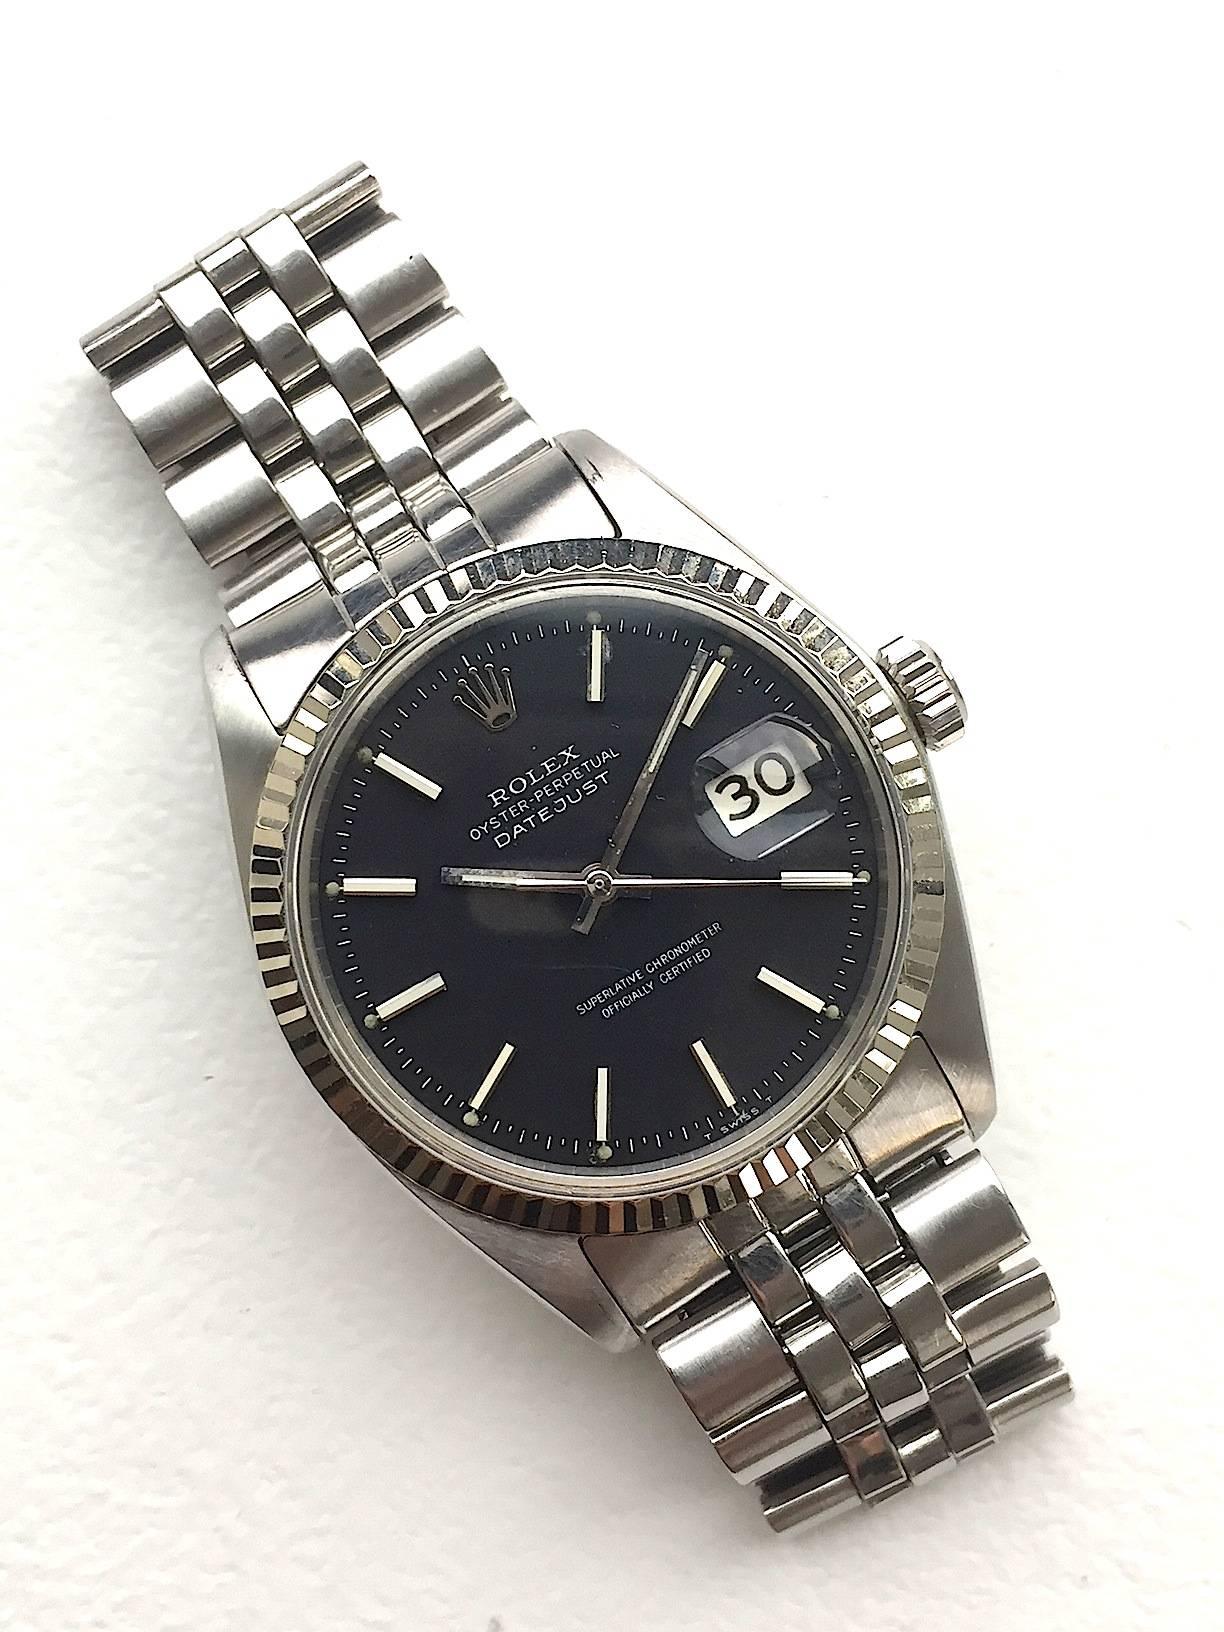 Rolex Stainless Steel and 18K White Gold Oyster Perpetual Datejust Watch
Beautiful Factory Black Matte Dial with White Applied Hour Markers
18K White Gold Fluted Bezel
Stainless Steel
36mm in size 
Features Rolex Automatic Movement with Calibre 1570